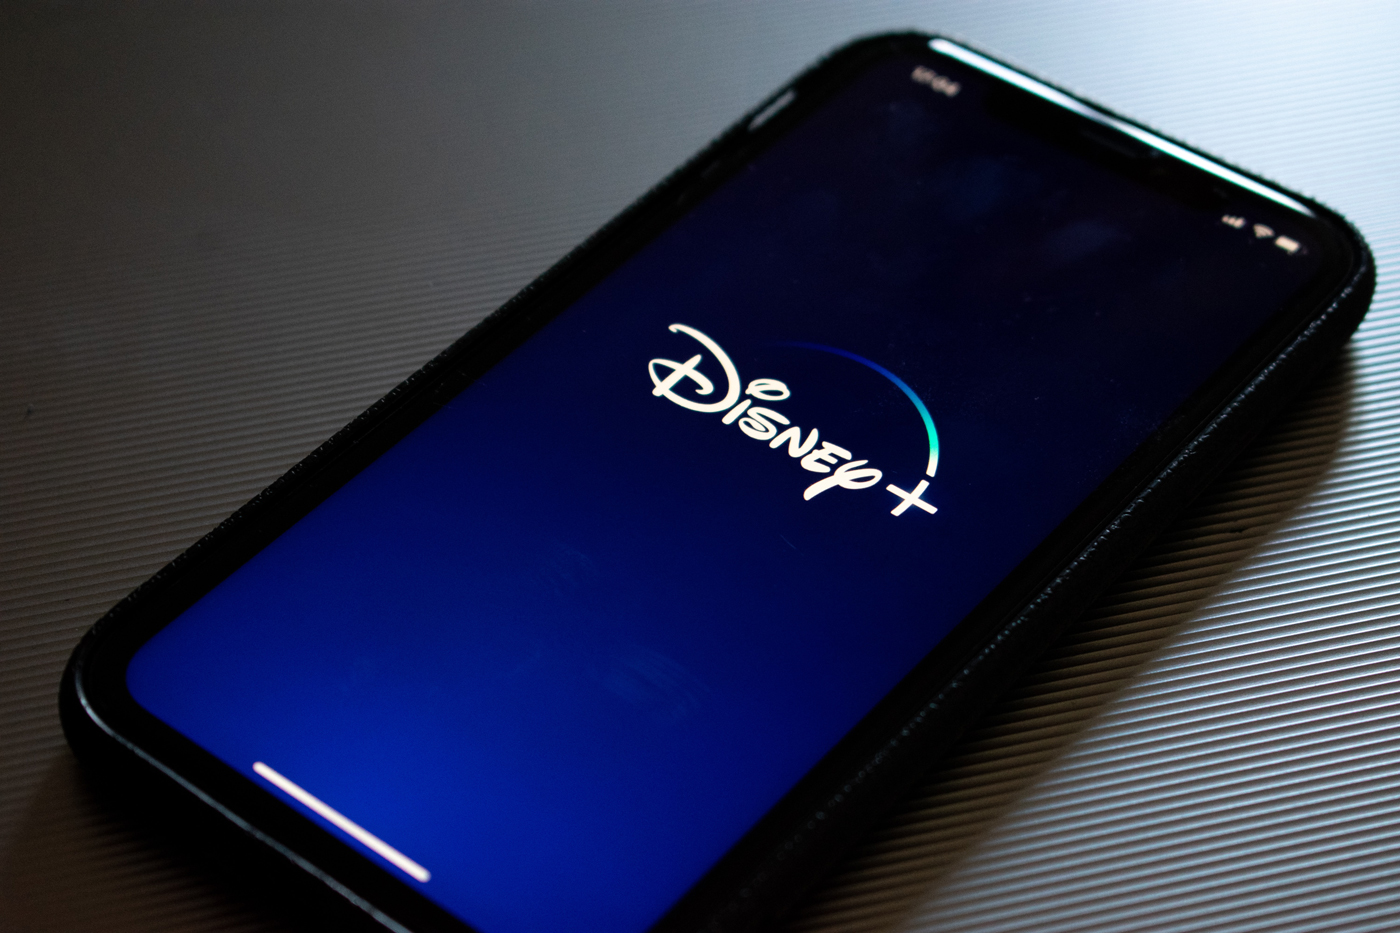 A mobile phone with Disney Plus loading on it